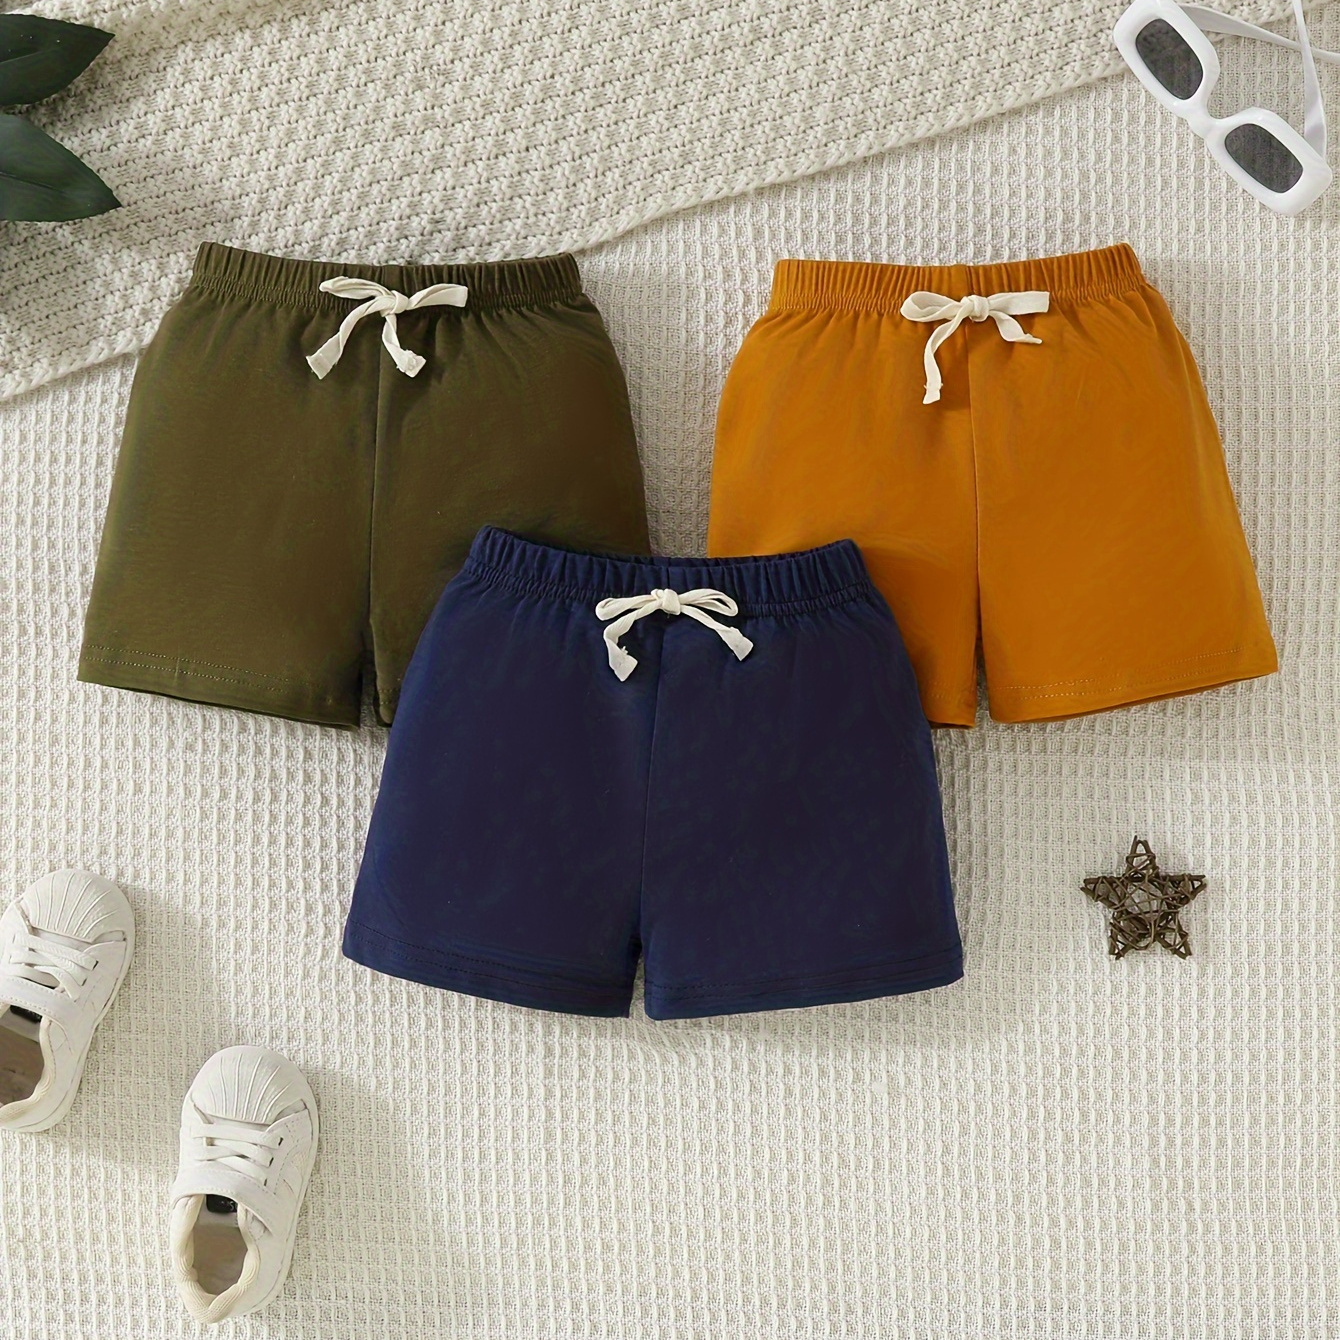 

3pcs Baby Boy's Summer Shorts Set, Comfortable Pure Cotton Casual Drawstring Waist Short Pants, Elastic Waistband Toddler Boy Clothing In Blue, Mustard, Olive Green Colors